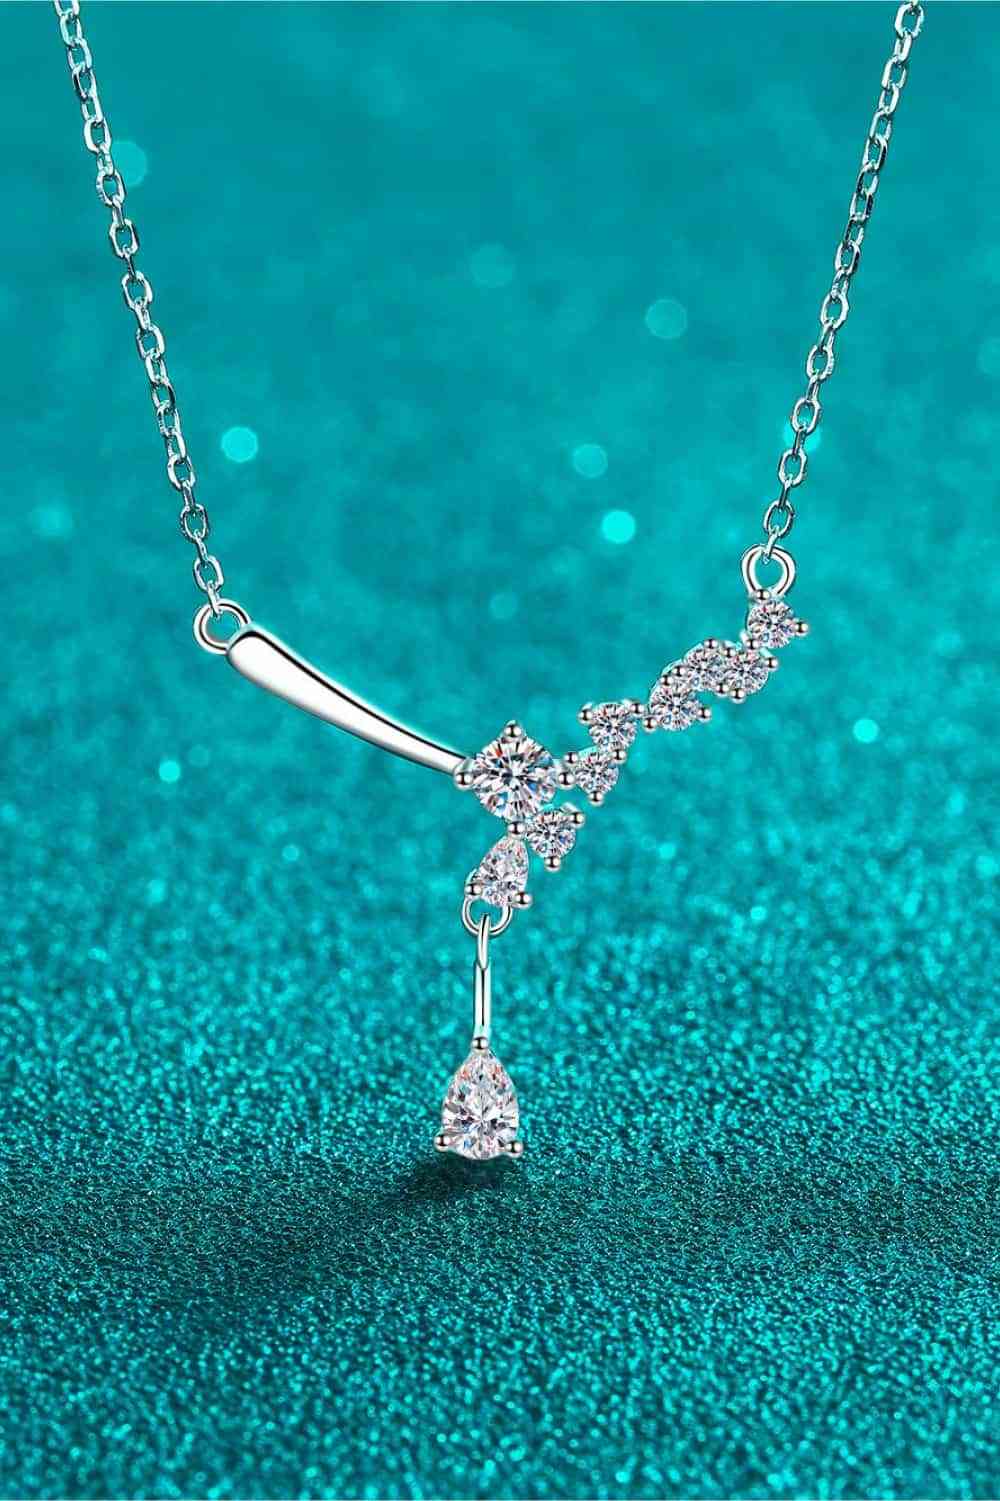 1 Carat Moissanite 925 Sterling Silver Necklace - Shop Tophatter Deals, Electronics, Fashion, Jewelry, Health, Beauty, Home Decor, Free Shipping